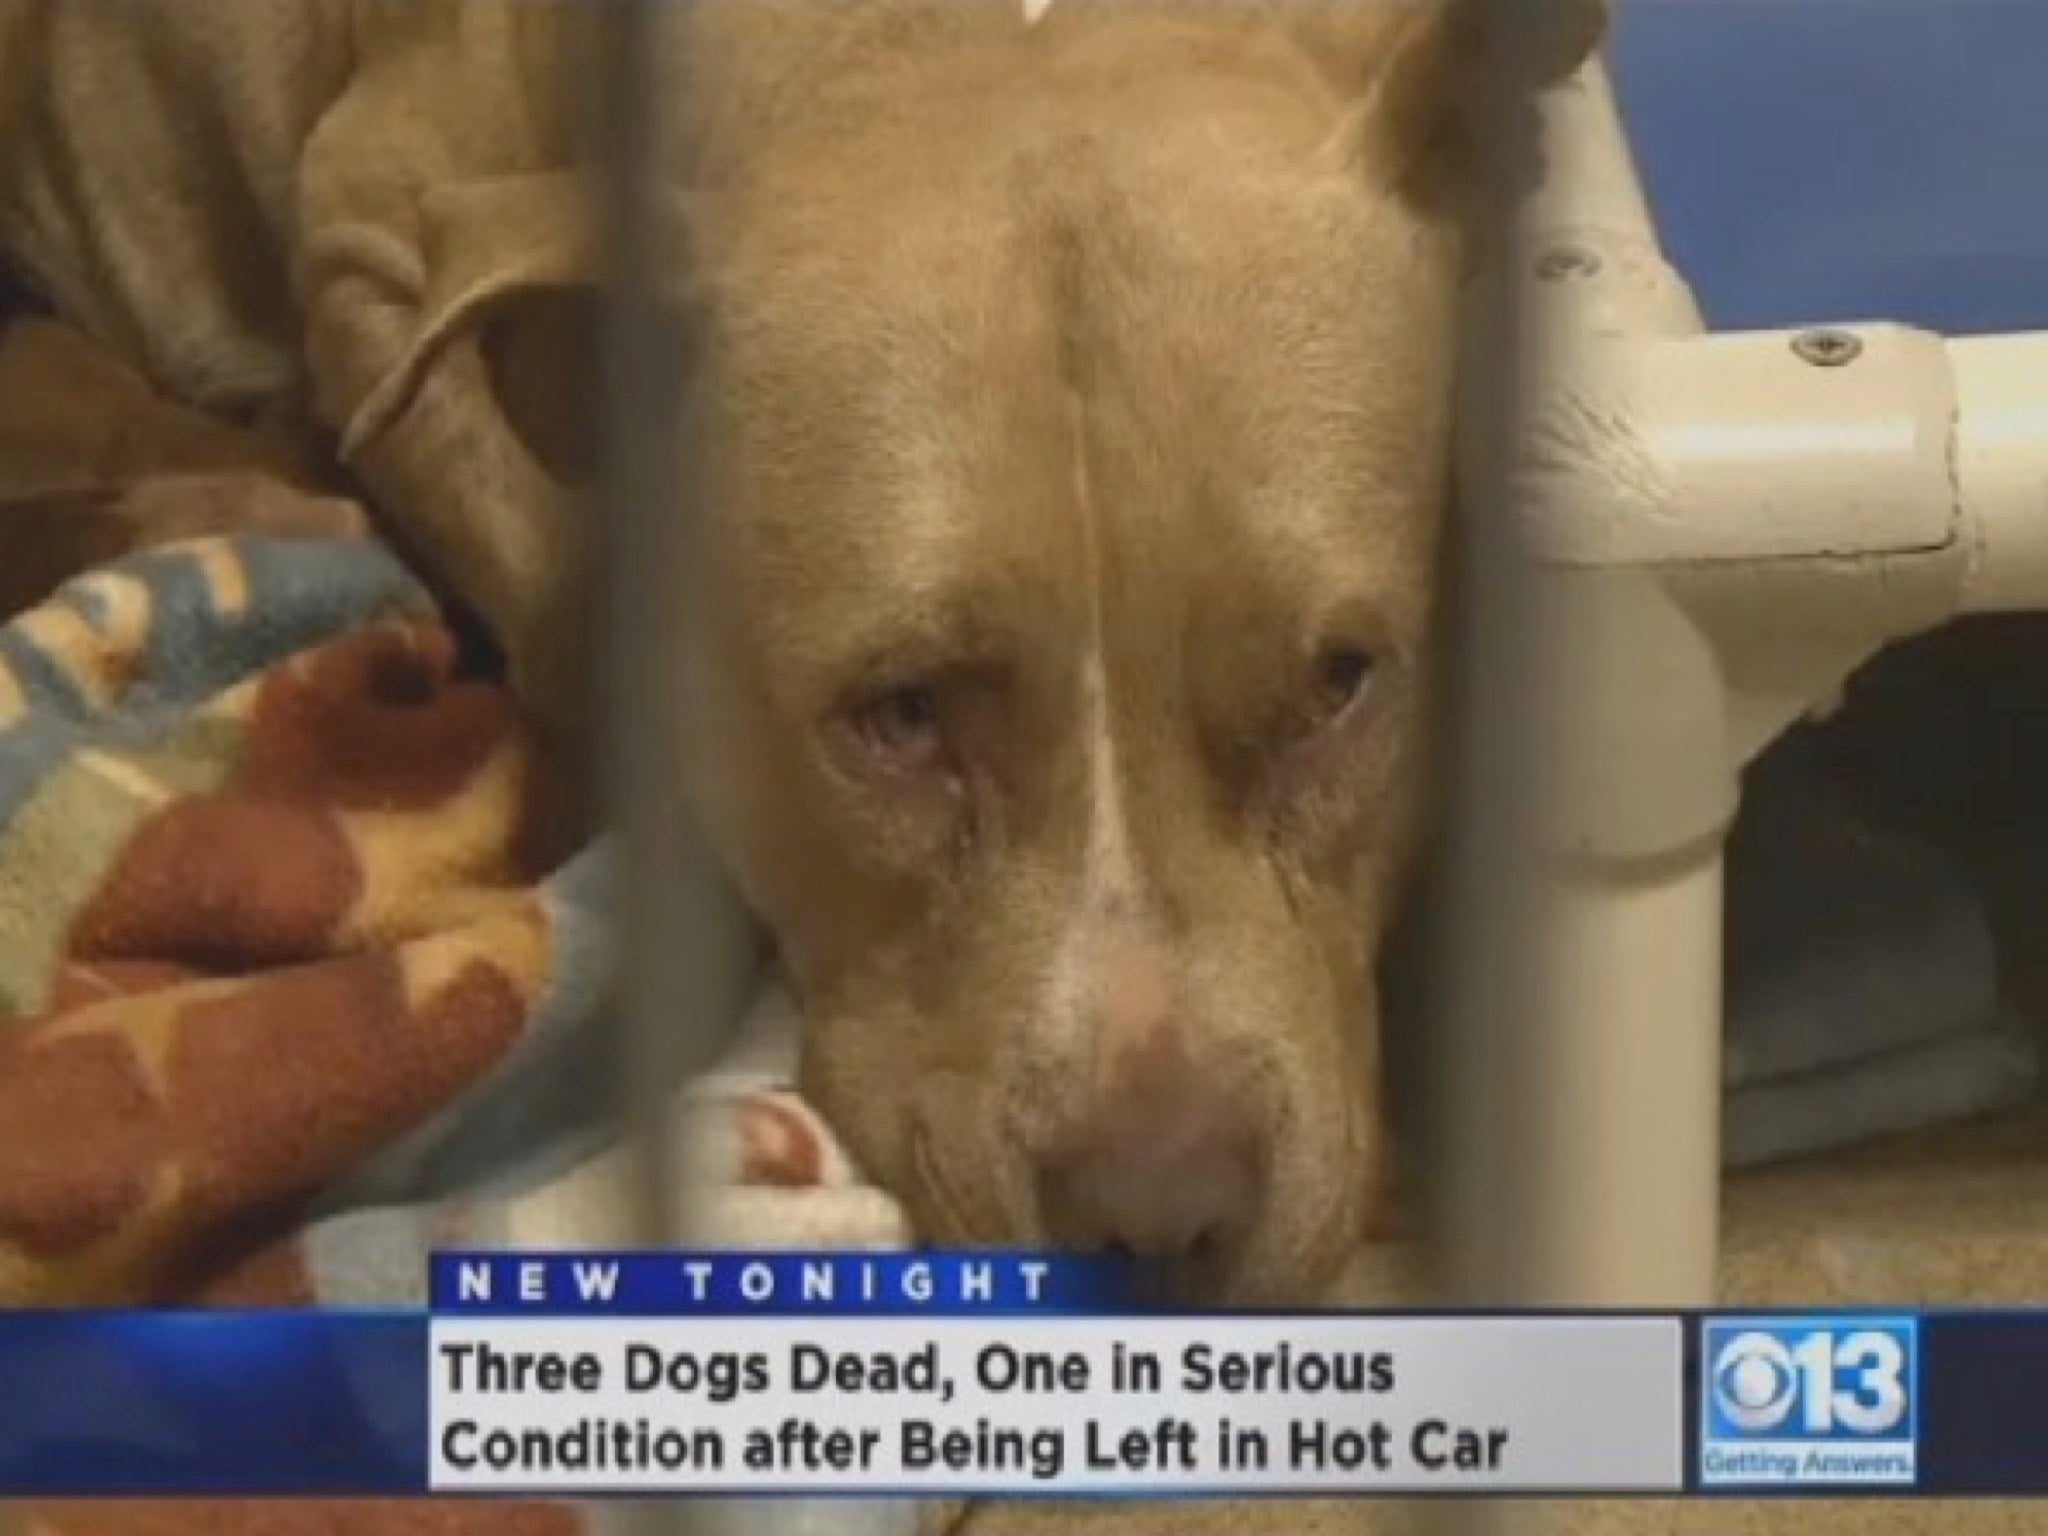 There is a national debate about the issue of dogs that get trapped inside cars